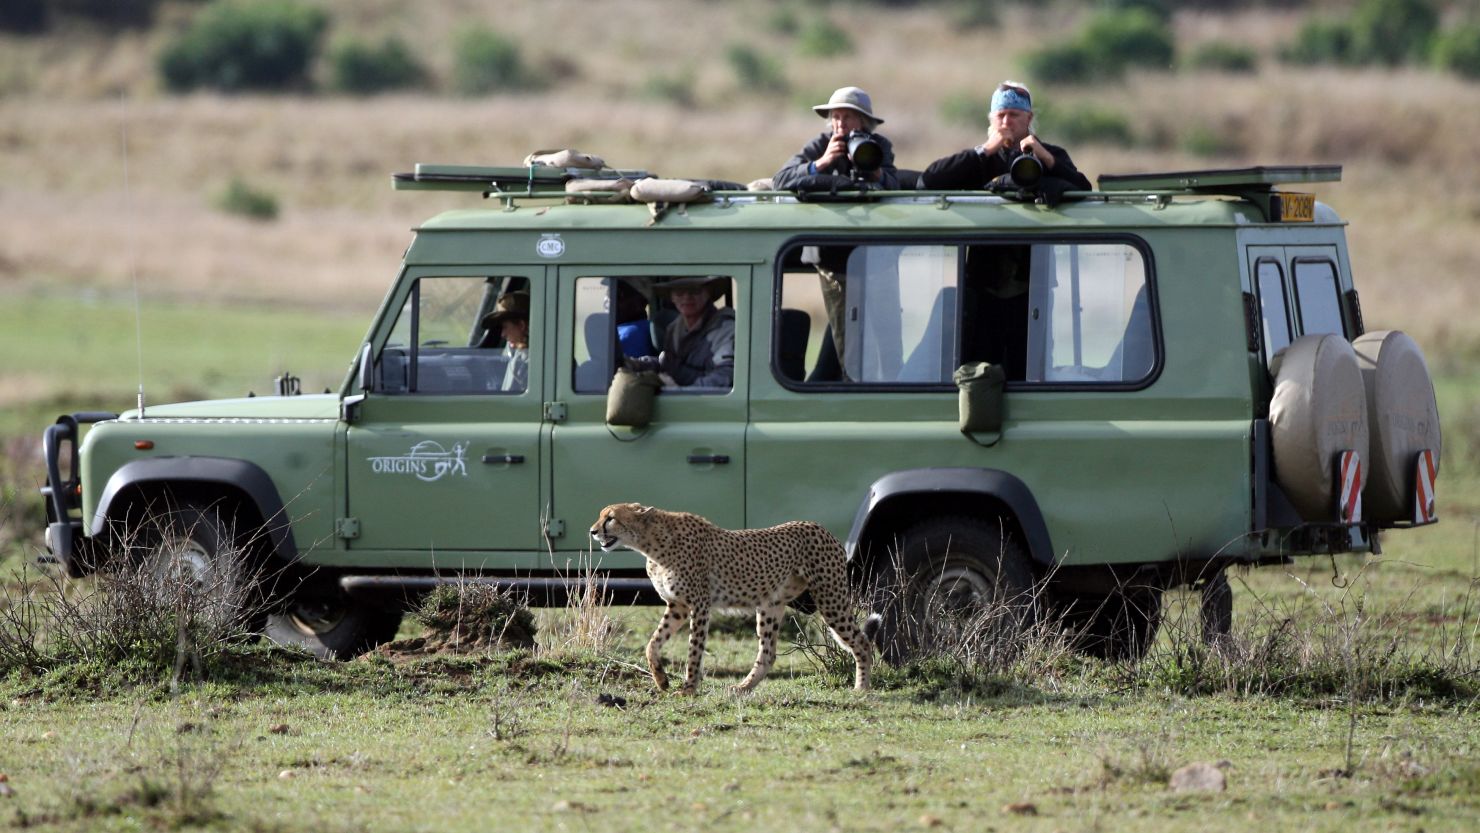 Travel agents often specialize in trips that involve more decisions and logistical challenges such as cruises and safaris.